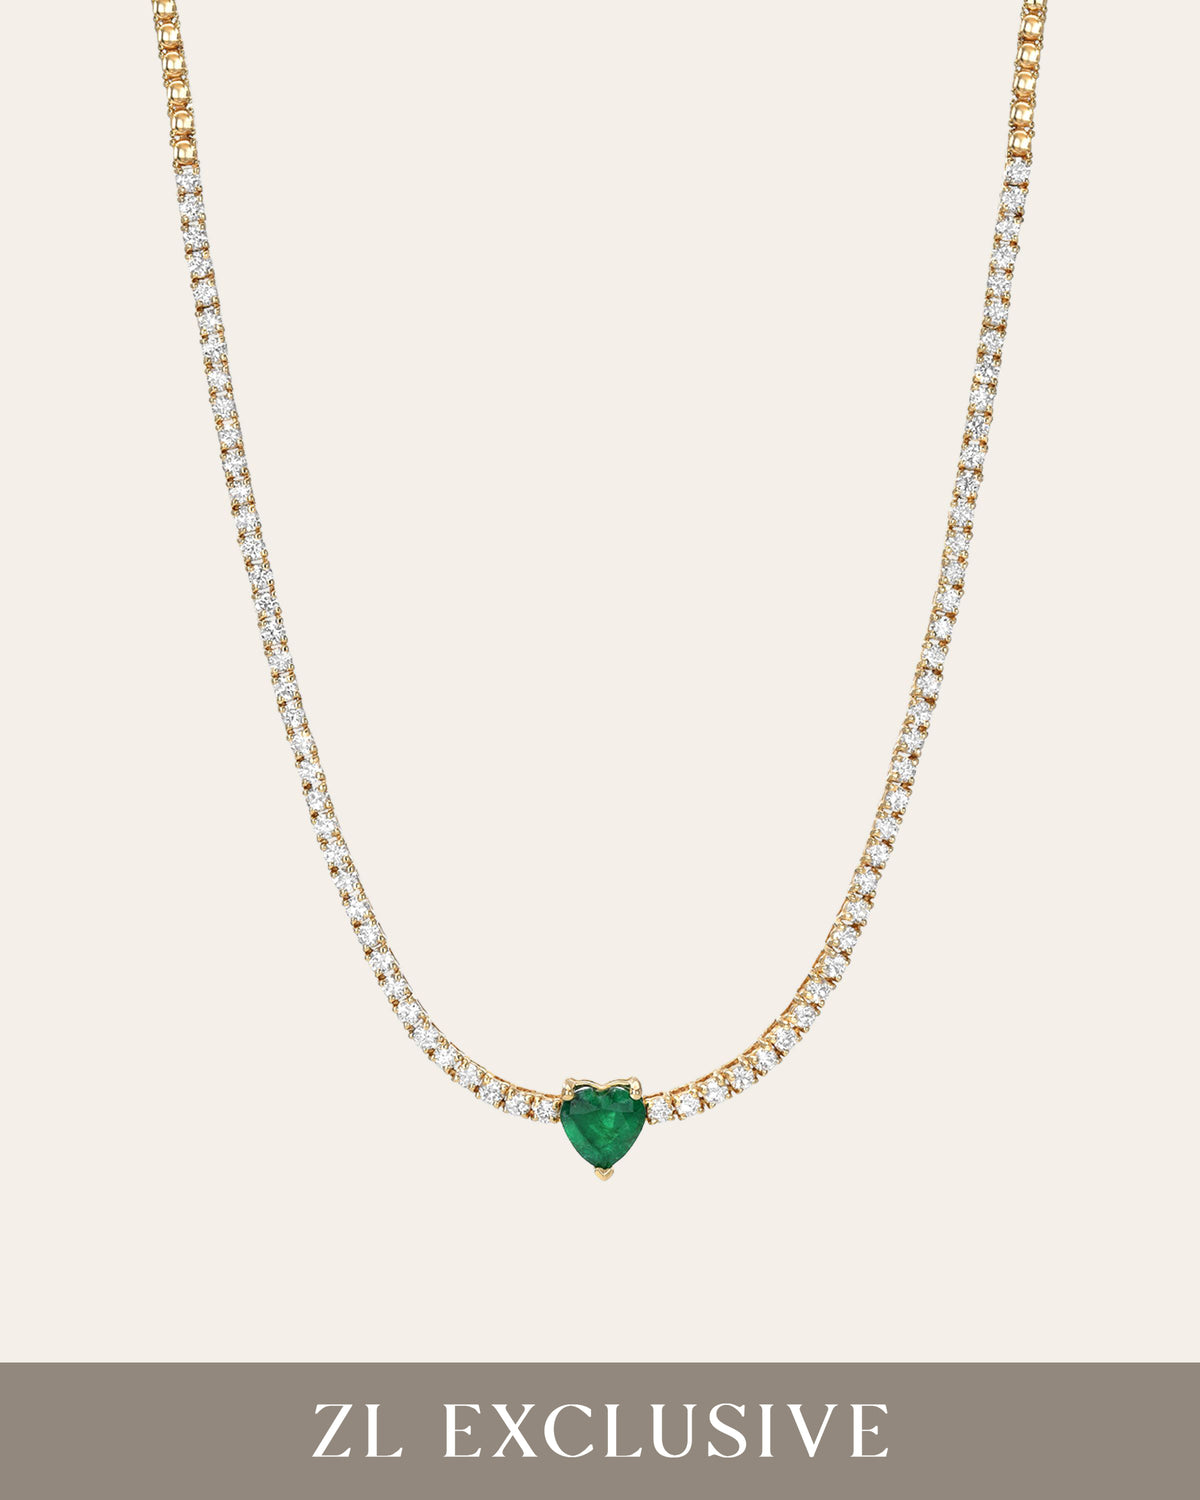 4 Prong Diamond Tennis Necklace with Heart Cut Emerald